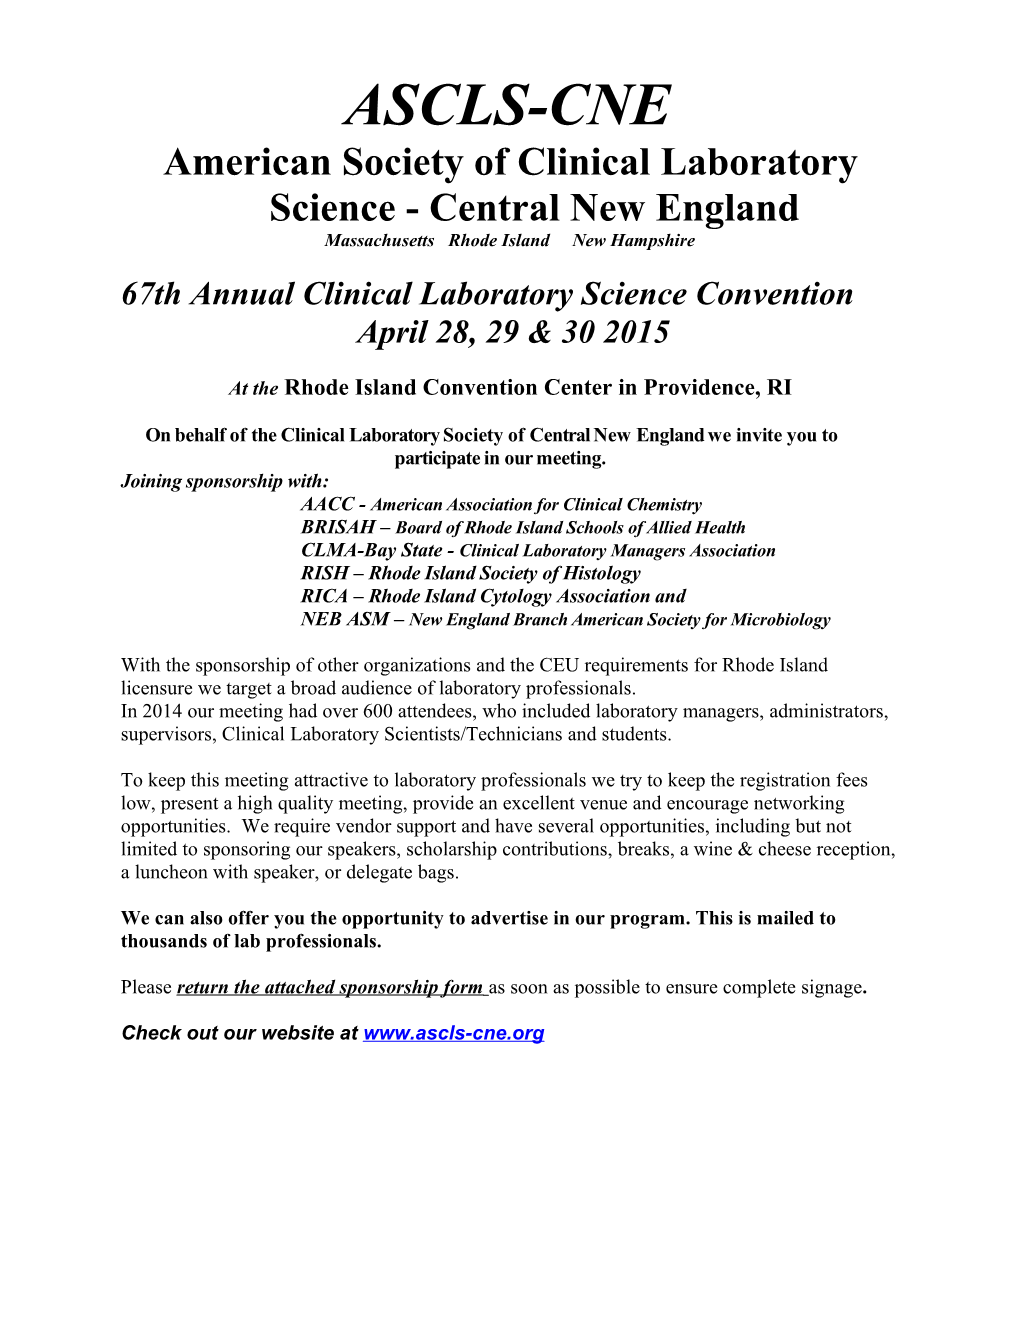 American Society of Clinical Laboratory Science - Central New England